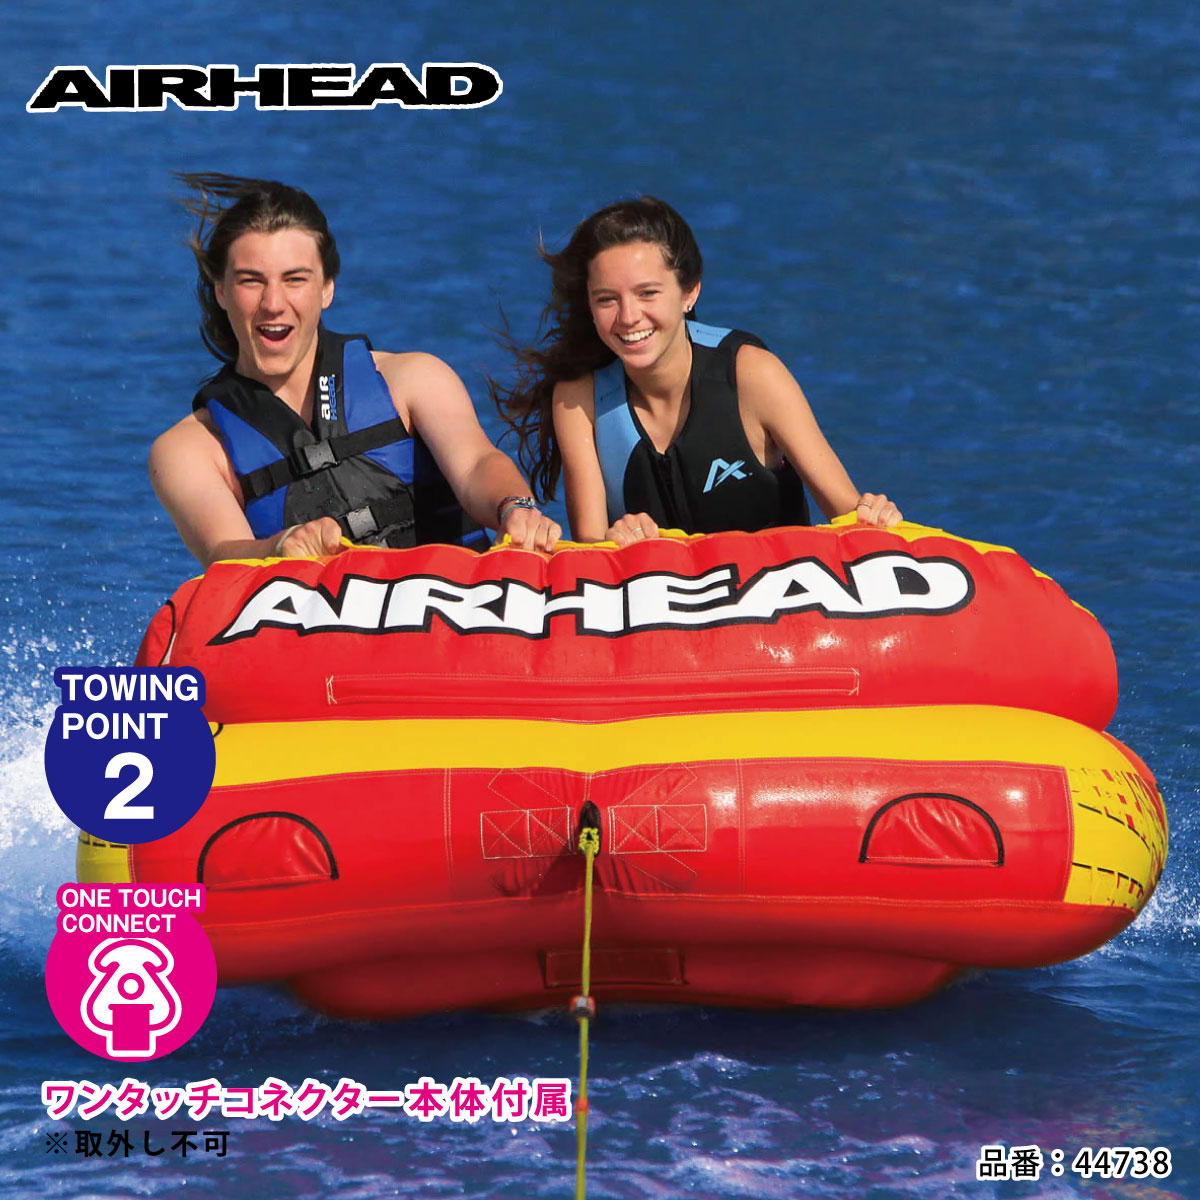 AIRHEAD Live Wire Capacity 2 people 44738 Rubber boat Banana boat Water toy Tong tube